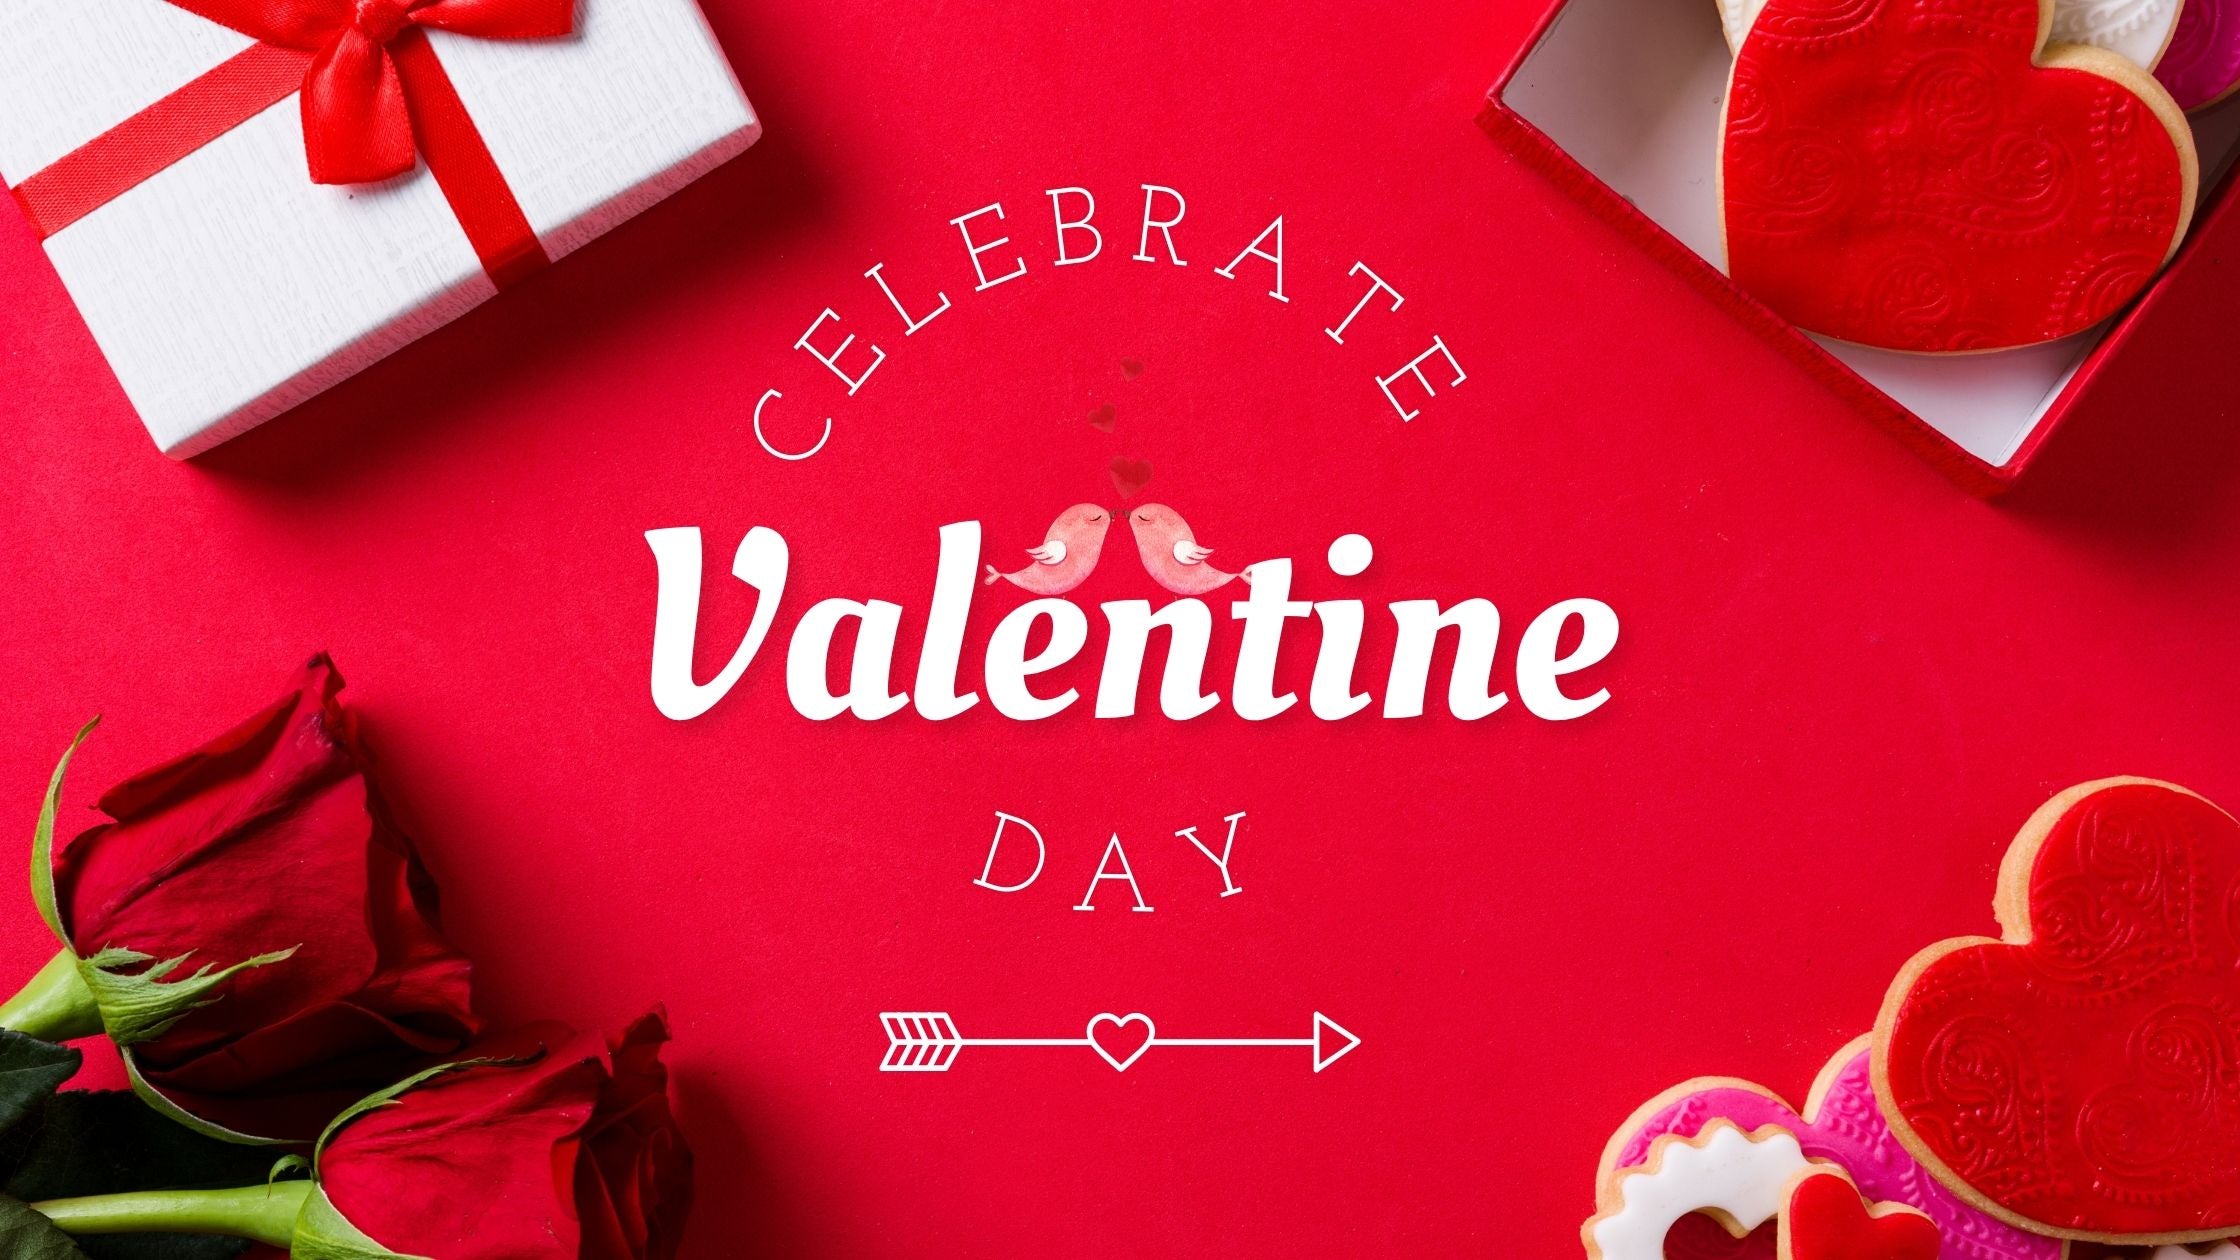 Why We Celebrate Valentine's Day and How To Make It Special - MARKET99